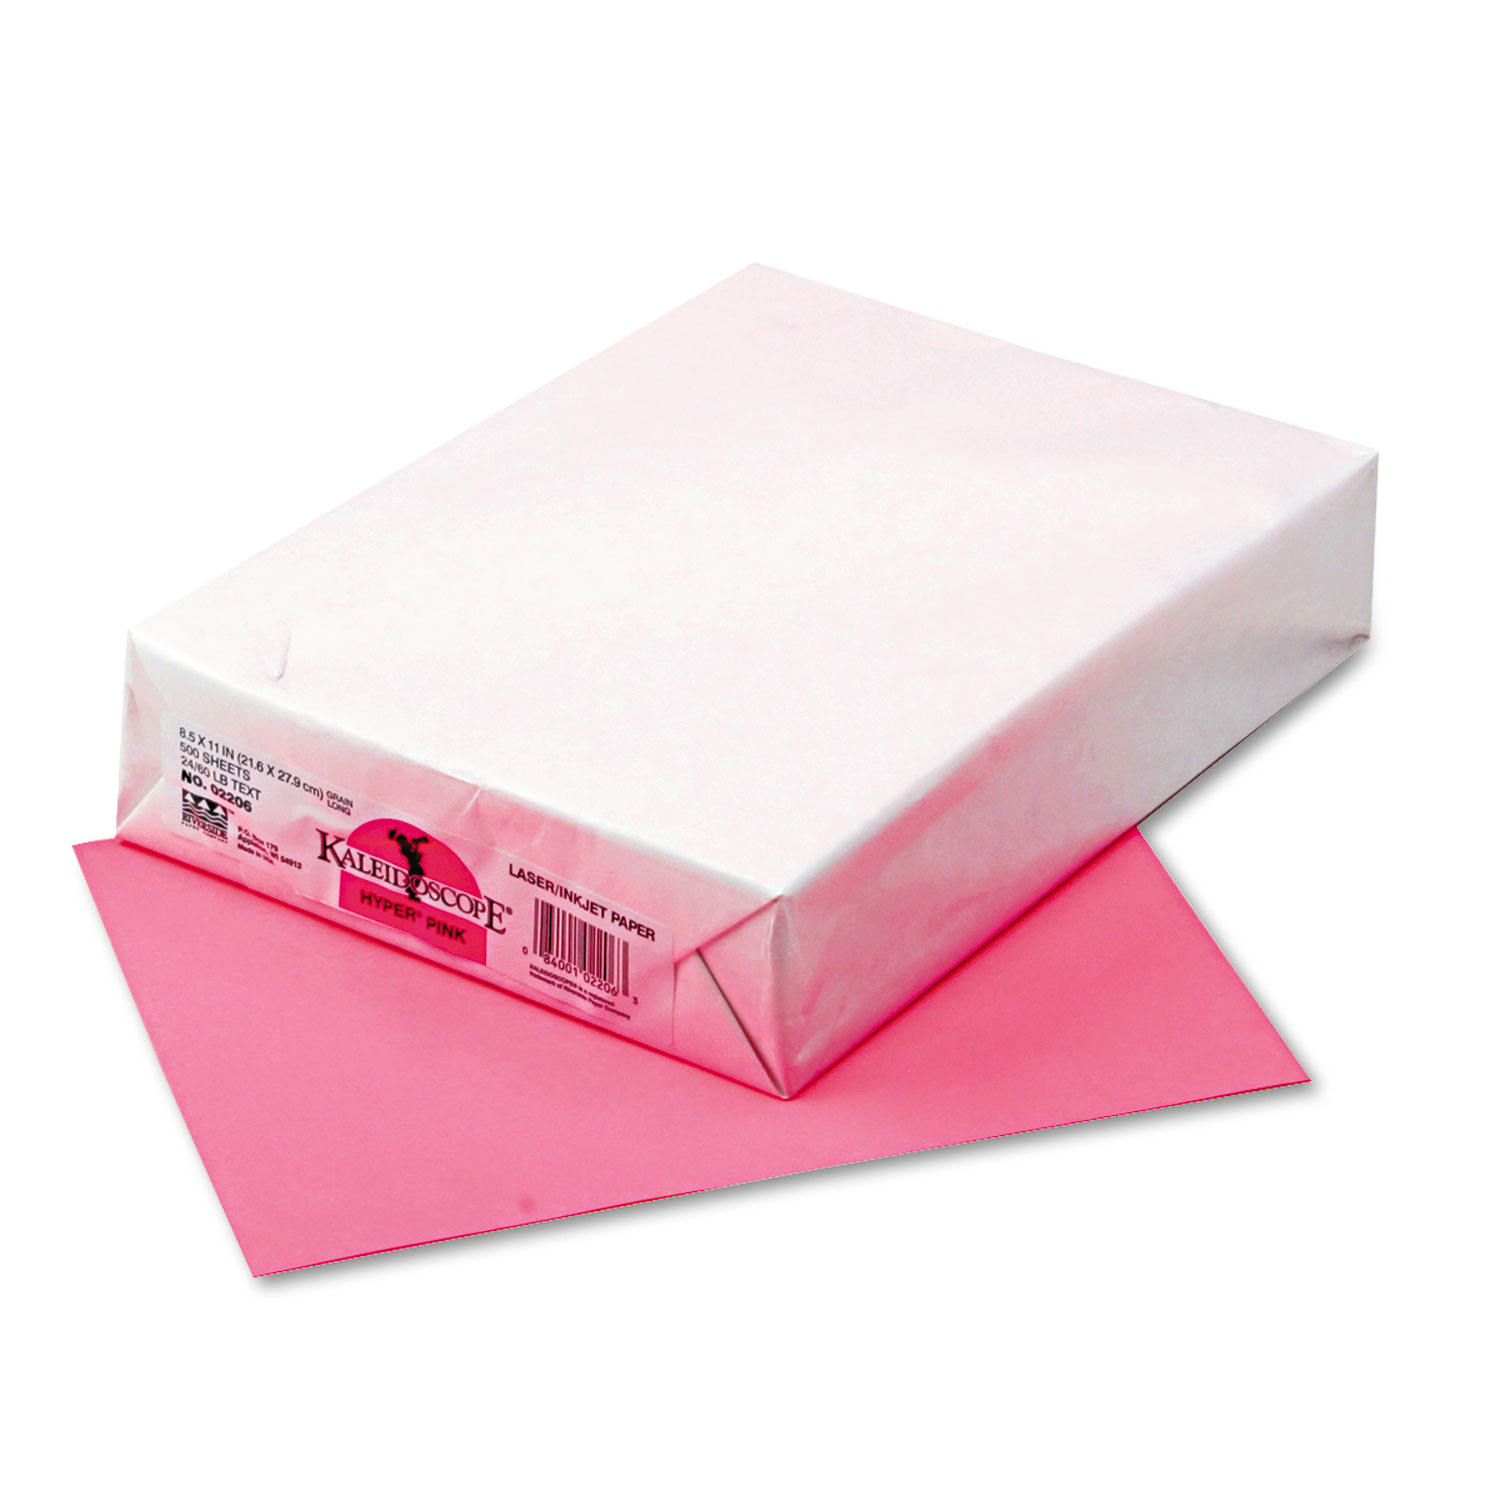  Pacon 102206 Kaleidoscope Multipurpose Colored Paper, 24lb, 8.5 x 11, Hyper Pink, 500/Ream (PAC102206) 